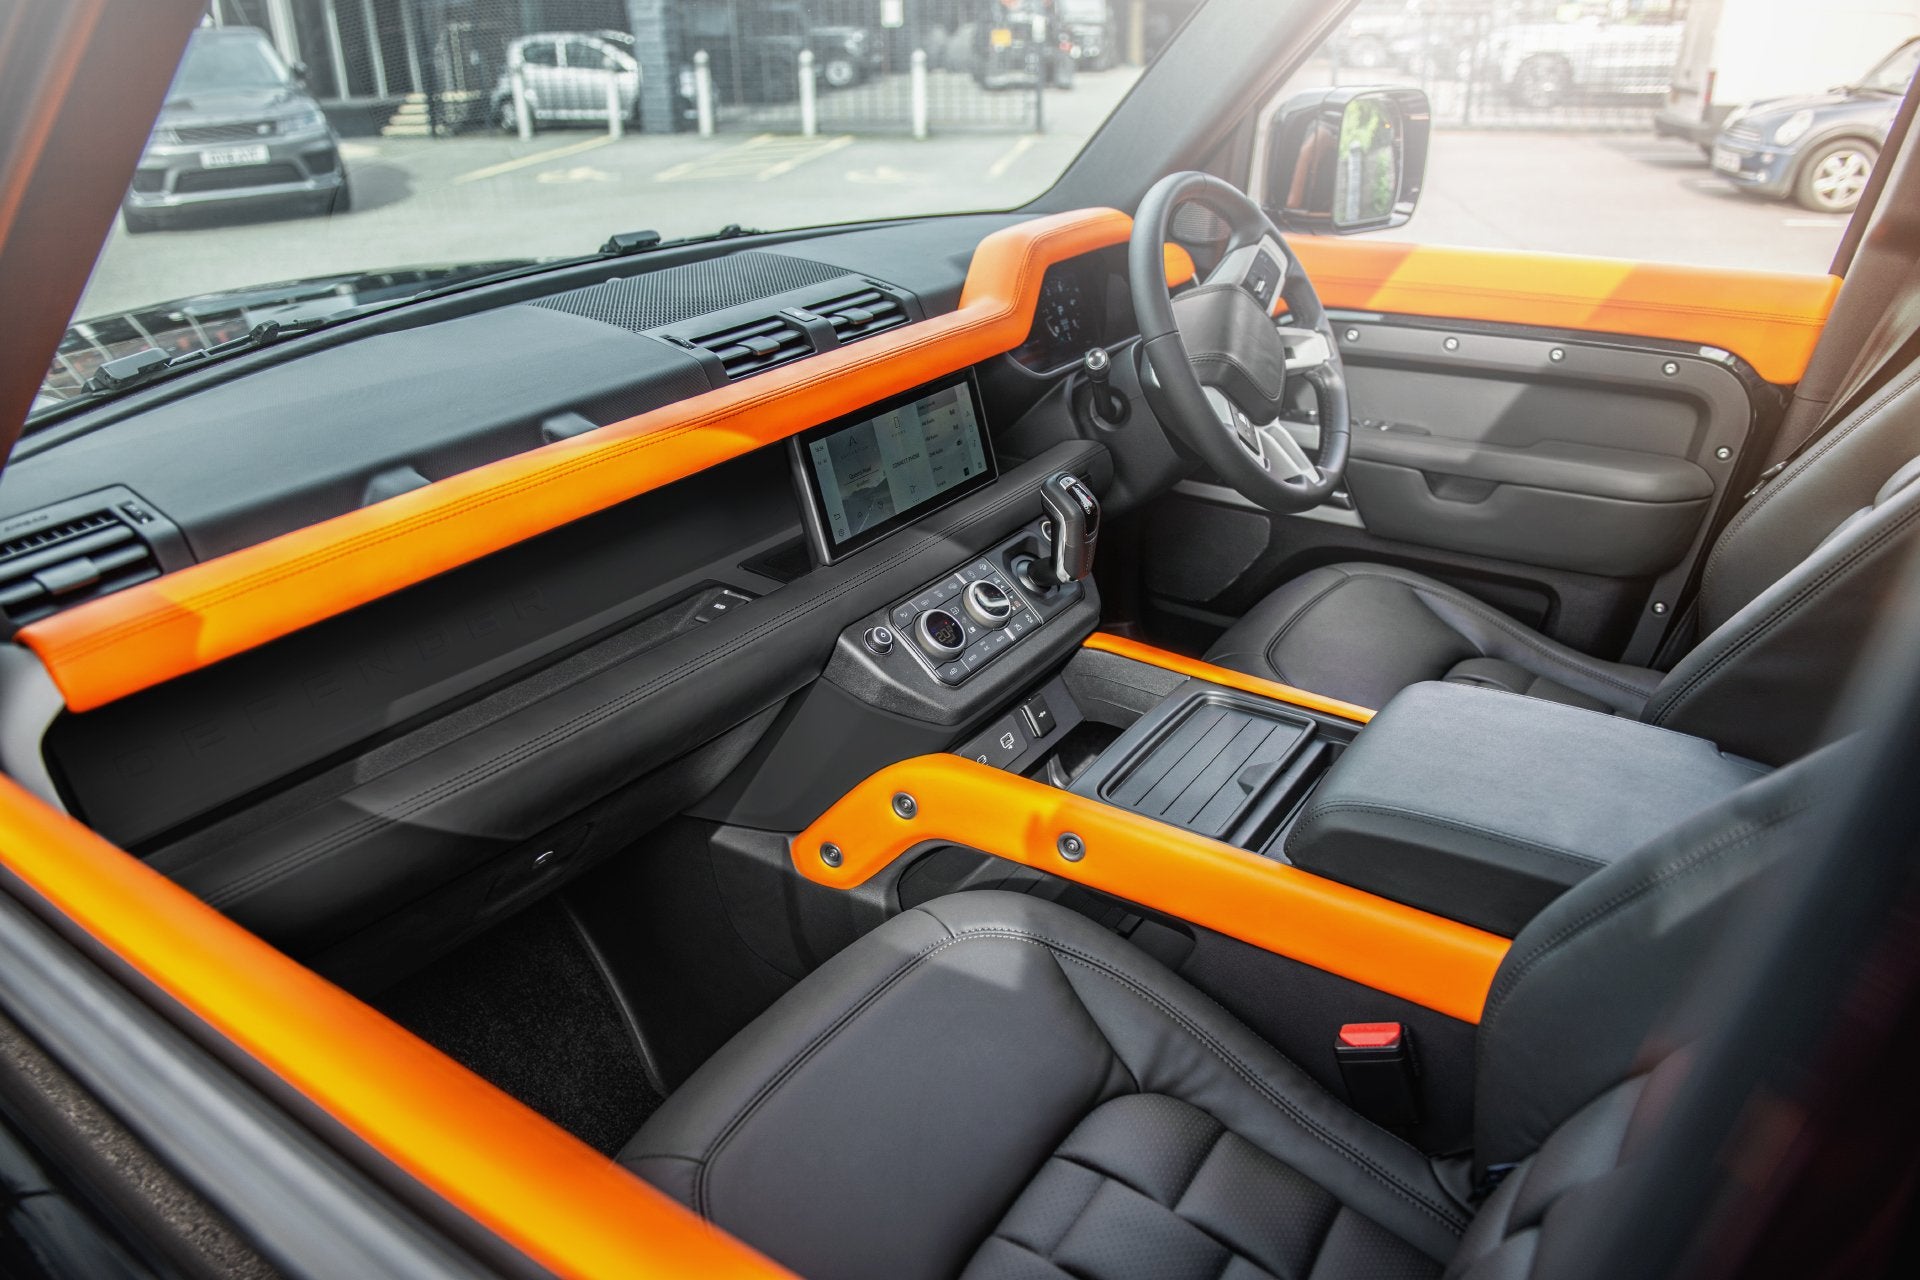 Land Rover Defender 110 (2020-Present) Environment 2: Upper and Lower Interior - Project Kahn